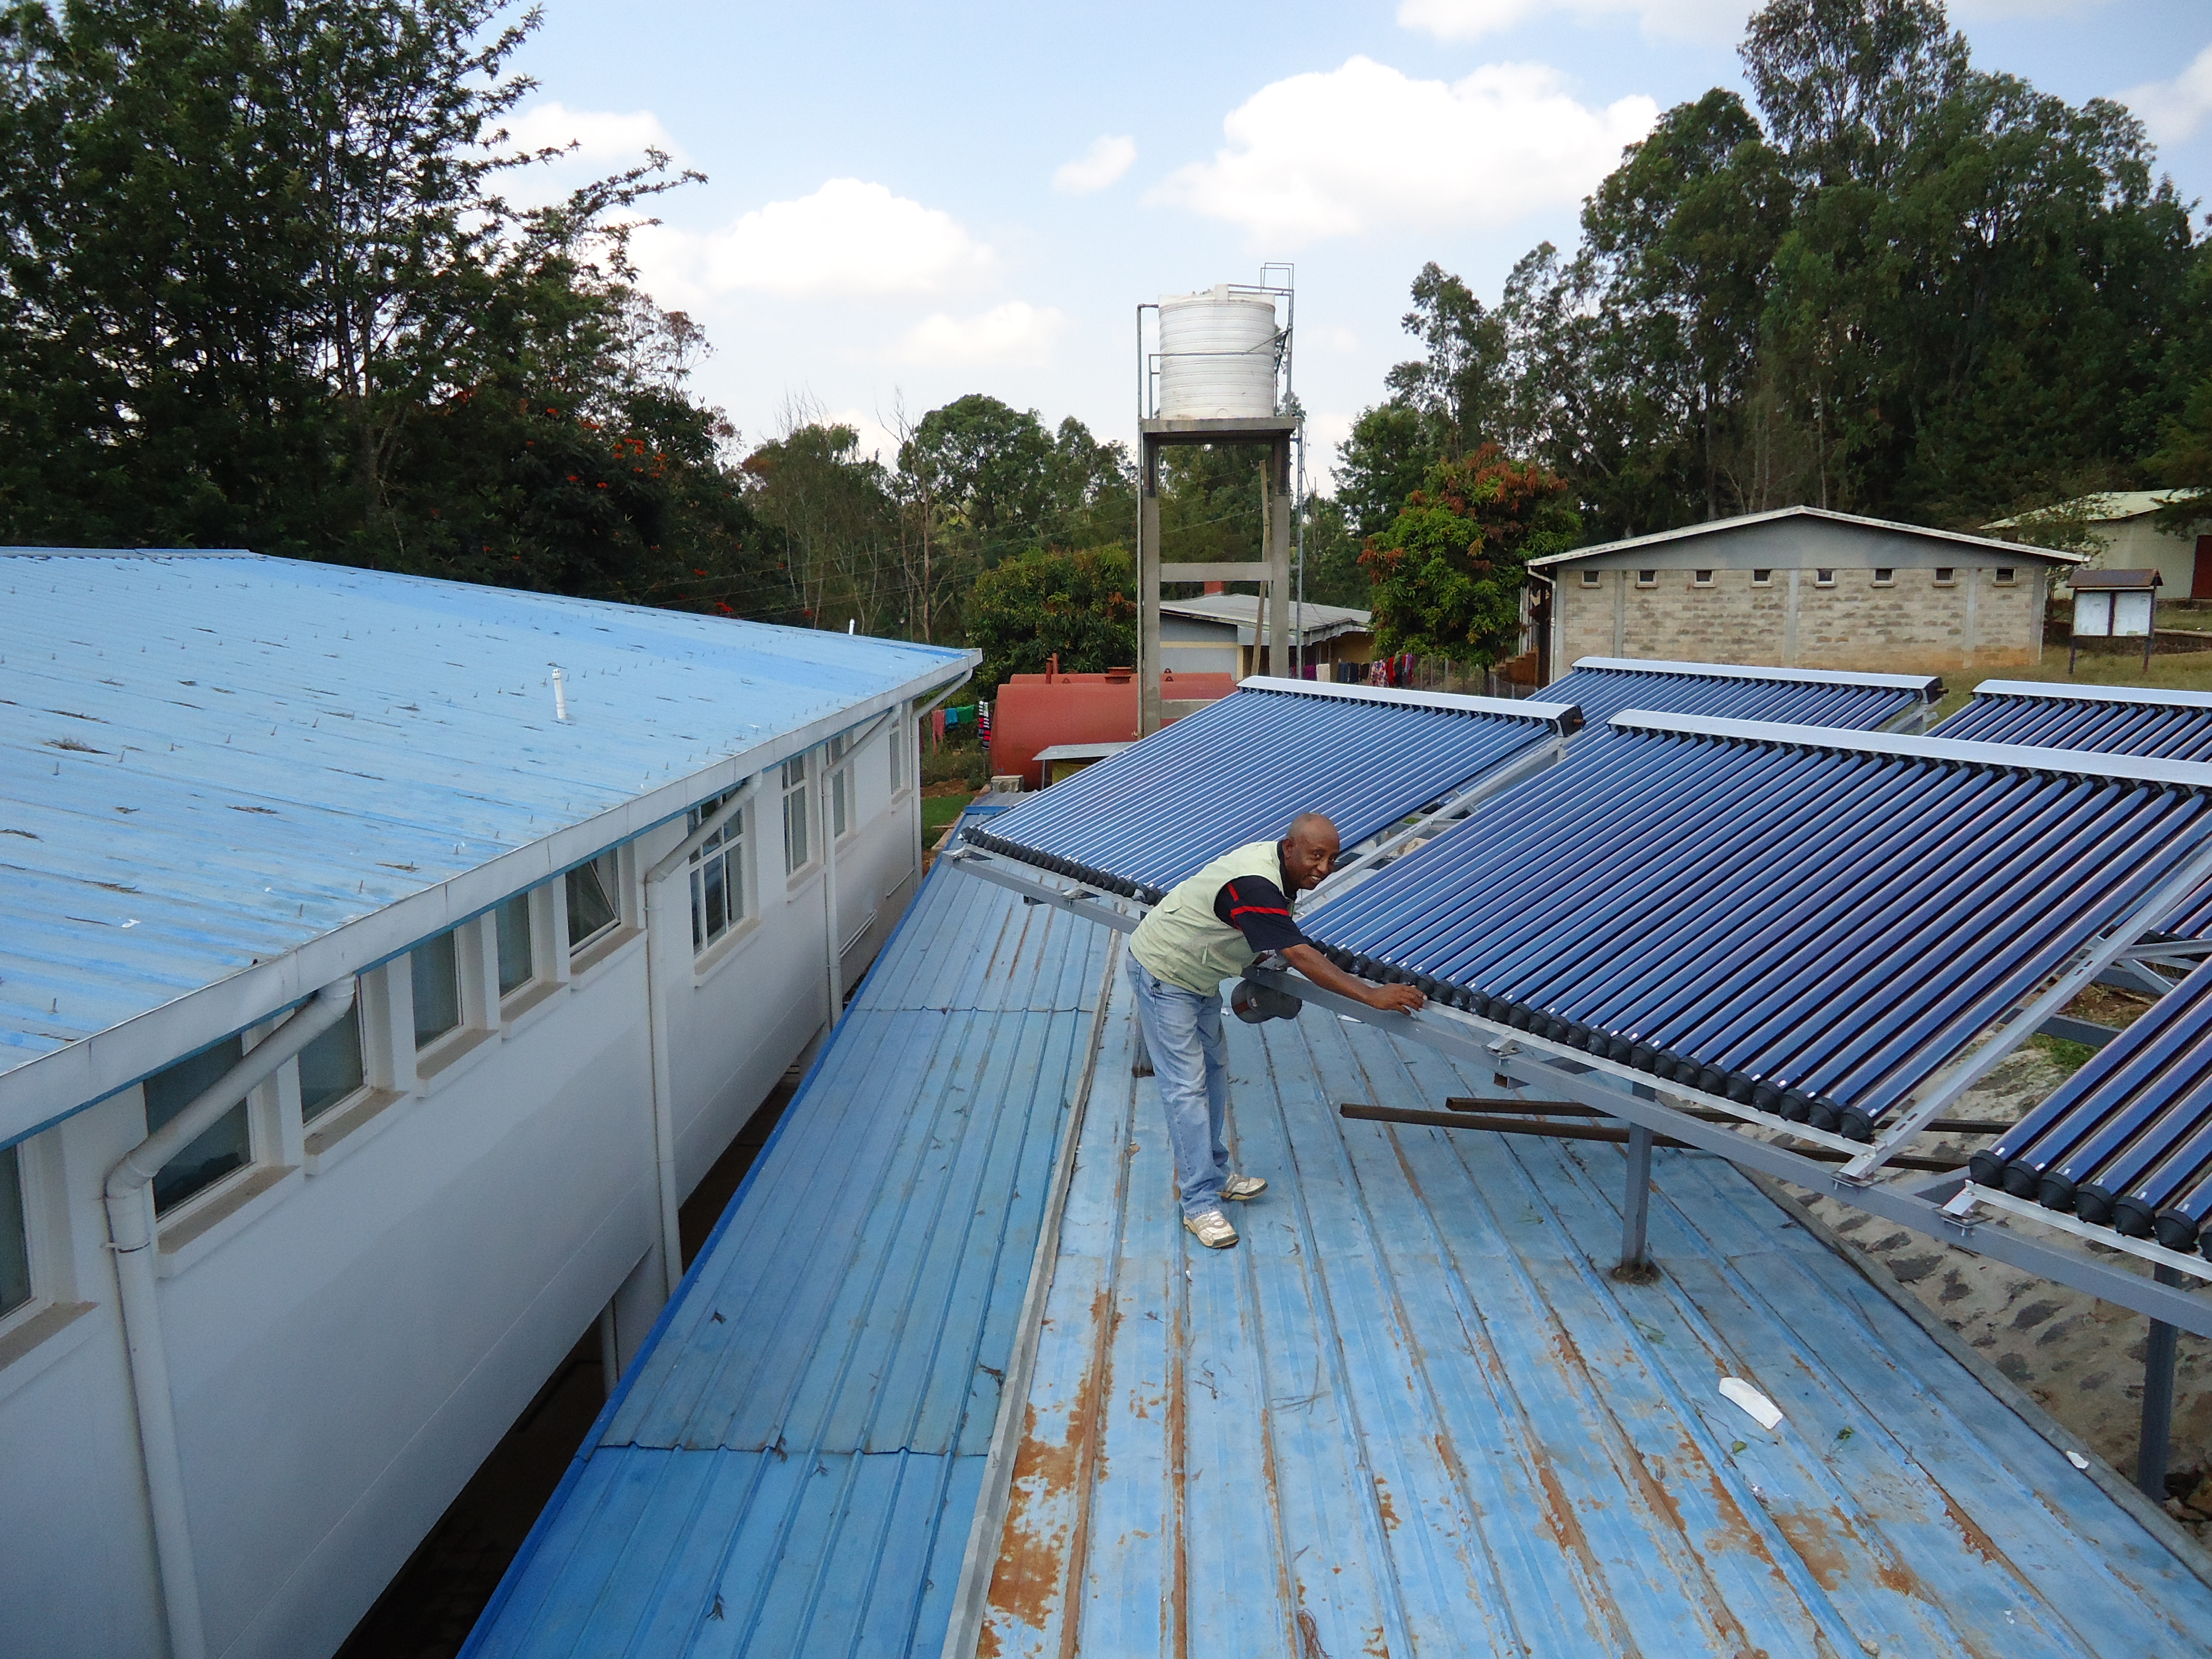 How to maintain the solar collector?